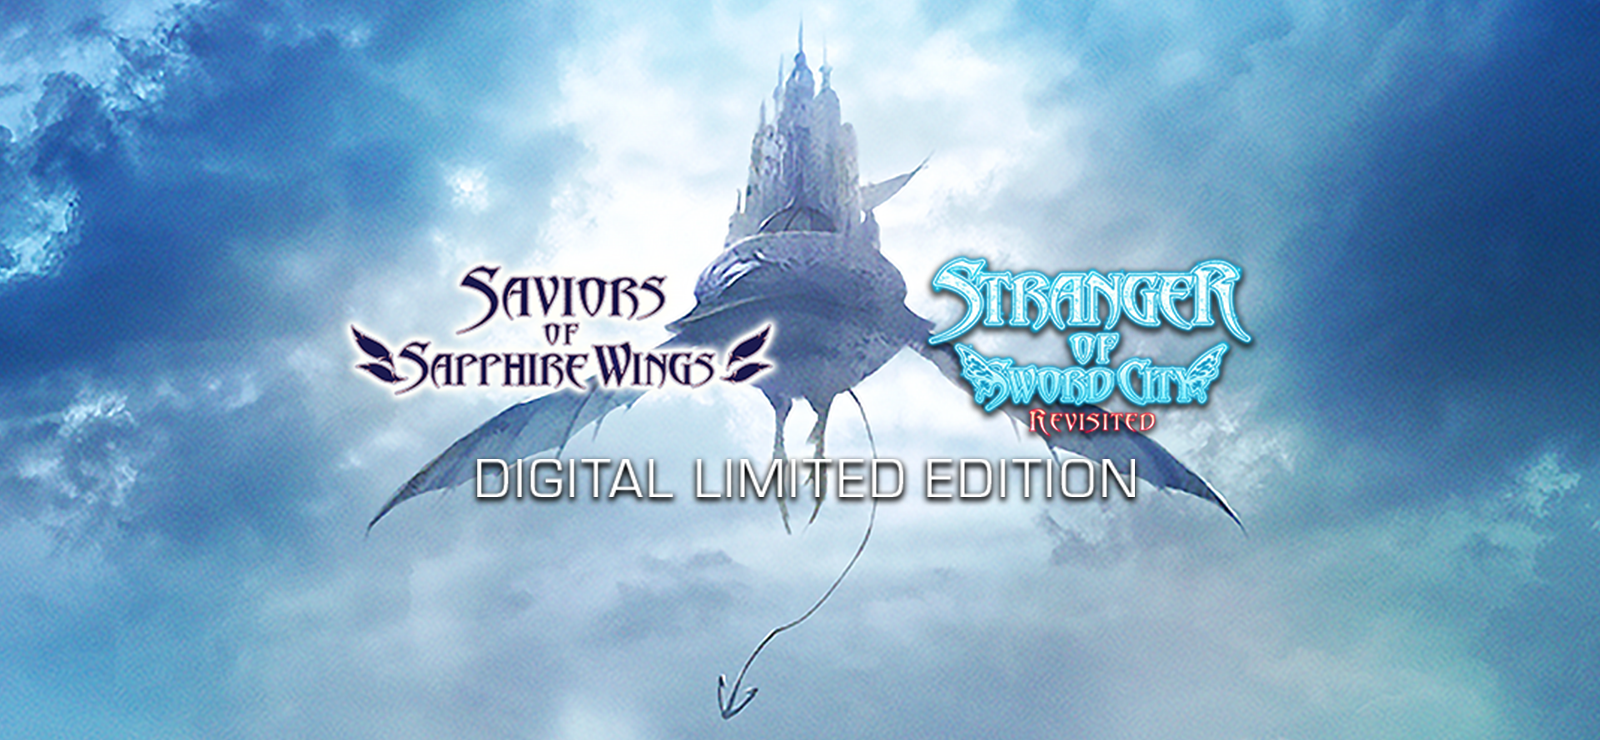 Saviors Of Sapphire Wings / Stranger Of Sword City Revisited Digital Limited Edition